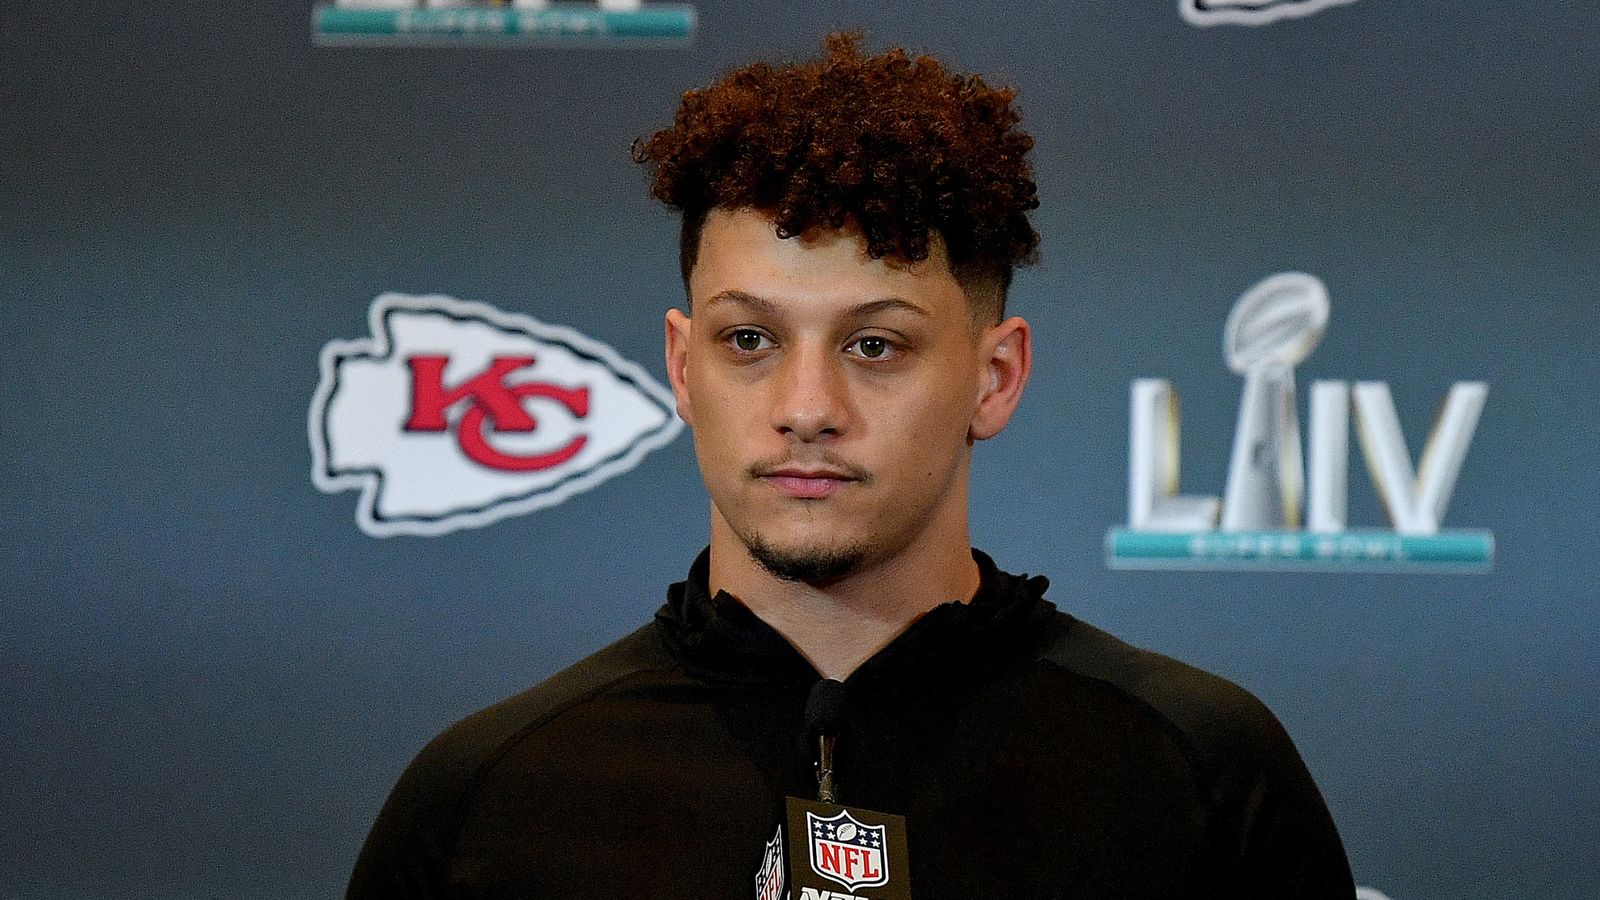 Patrick Mahomes: I have the ability to speak out and people will listen ...